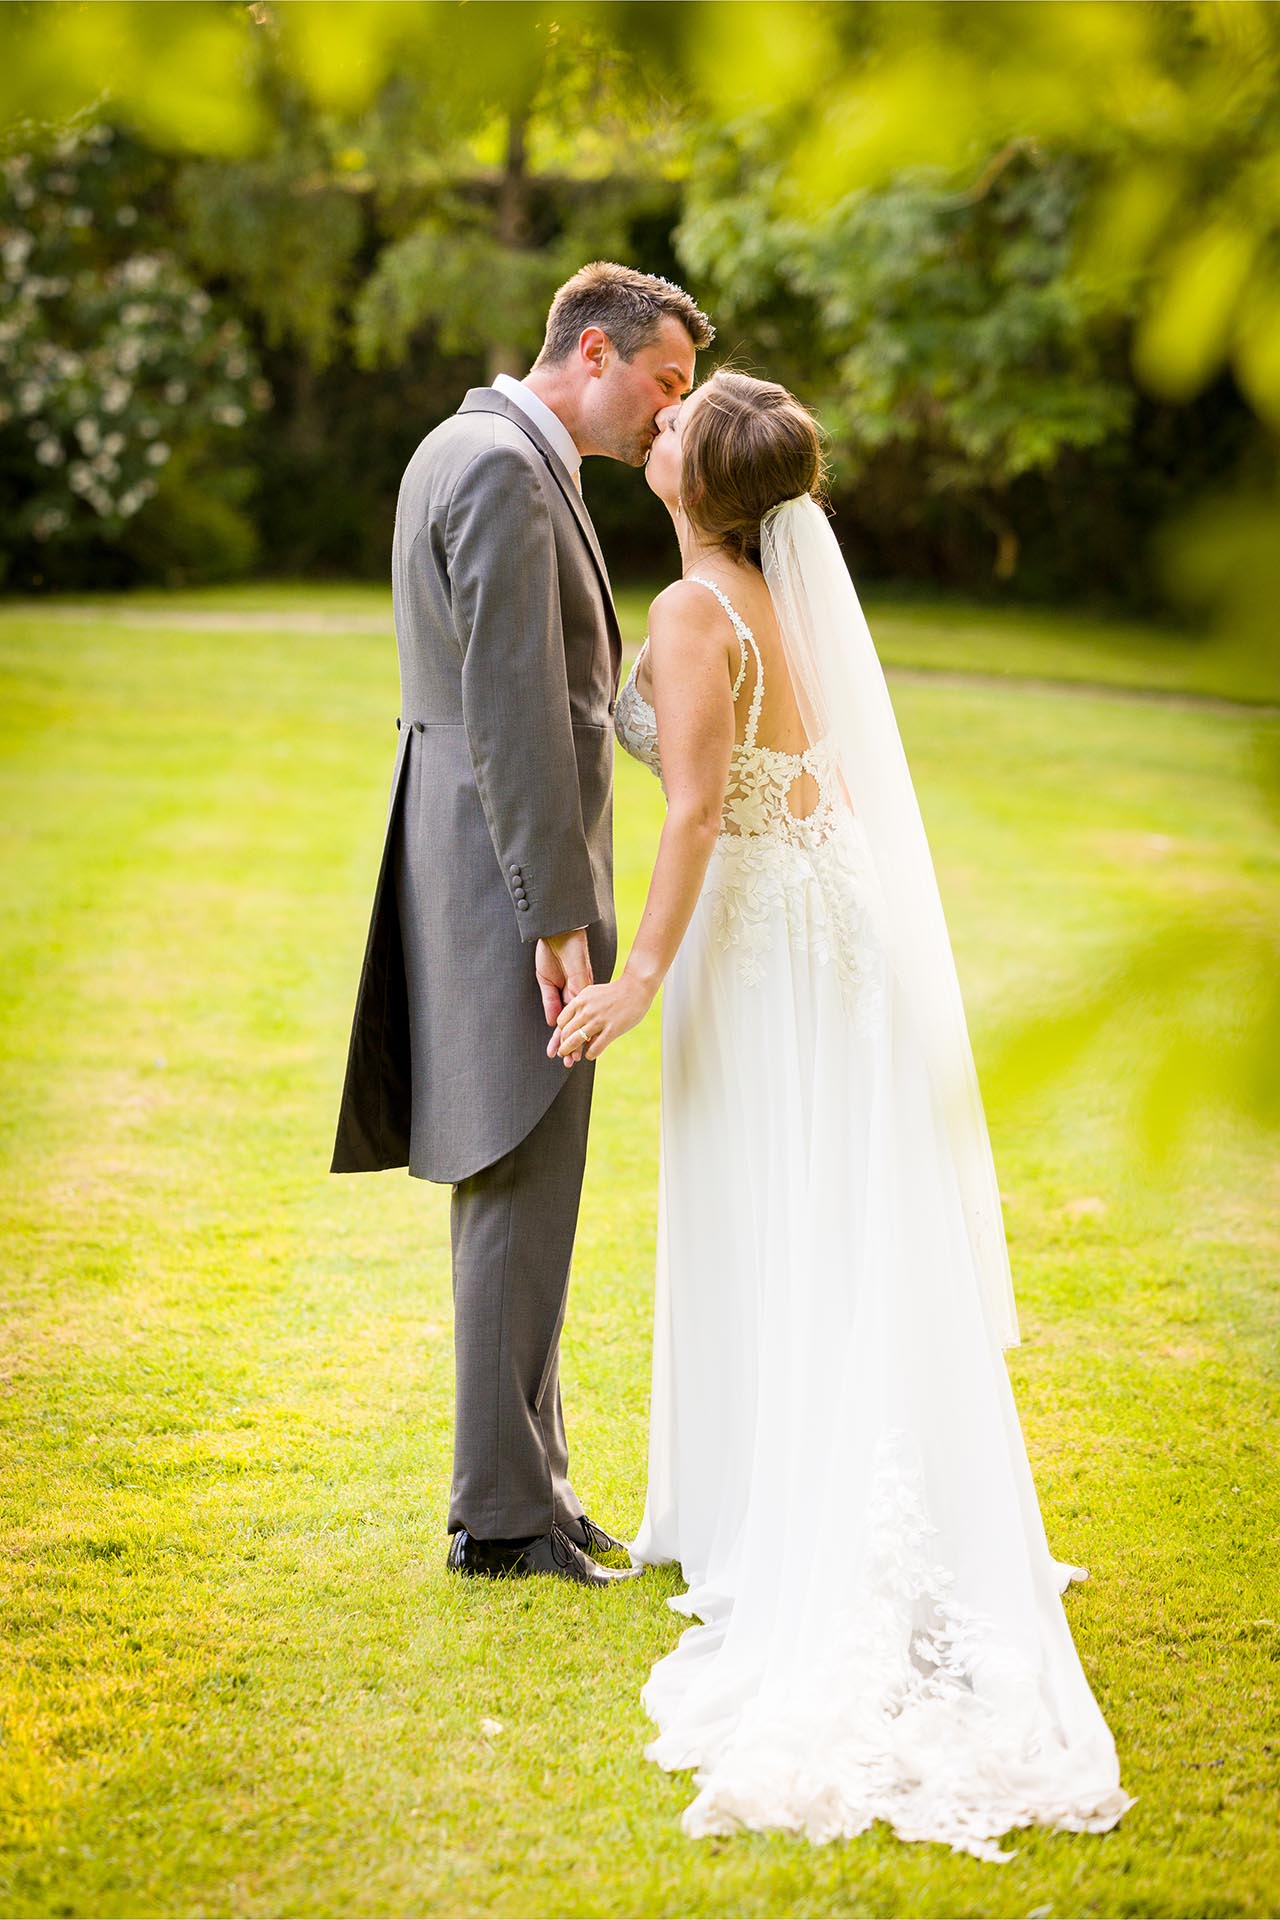 Bride and groom photograph at Leez Priory, Great Leighs, Chelmsford, Essex